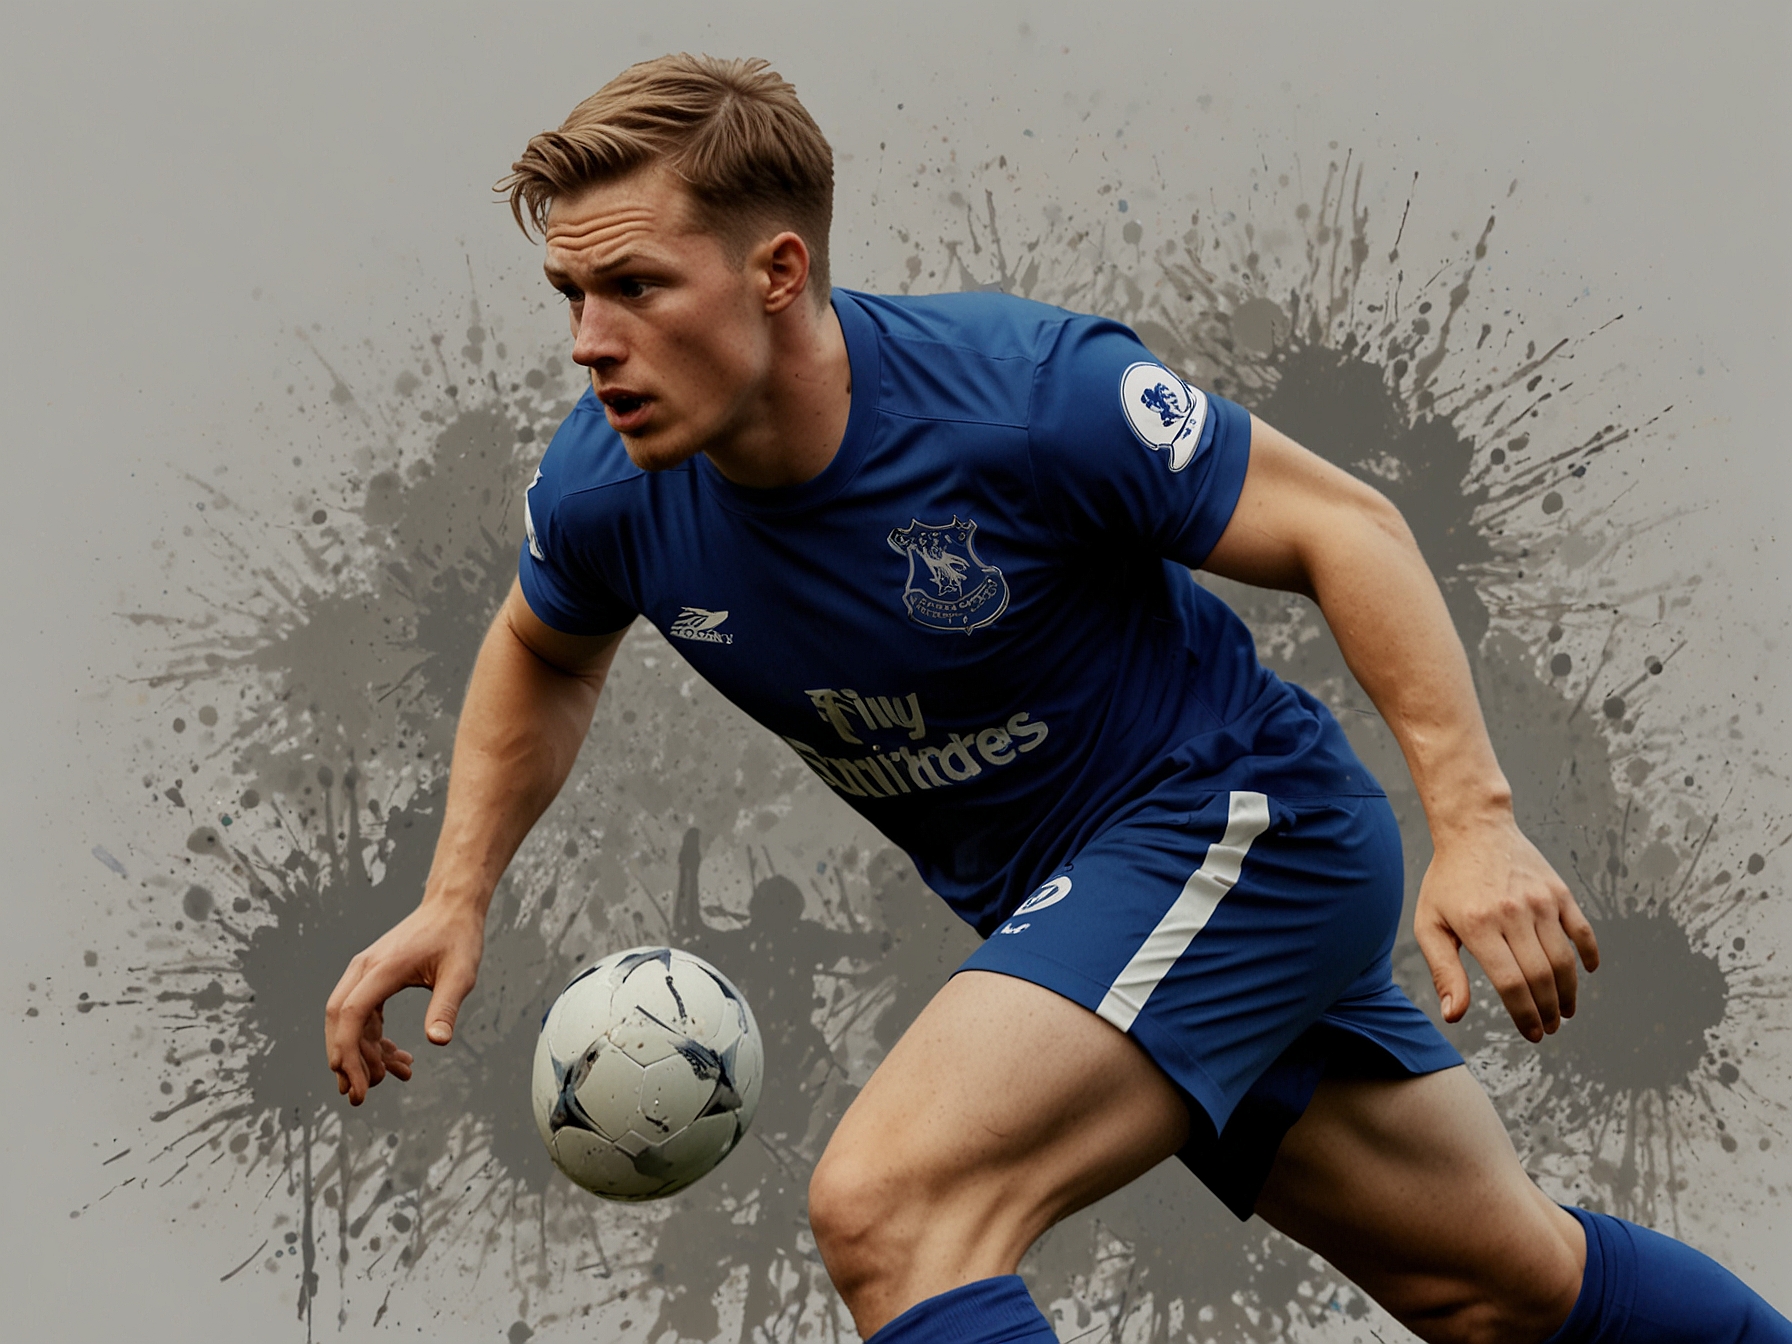 Jarrad Branthwaite in action for Everton, showcasing his defensive skills and versatility. The young player's talent has caught the eyes of top Premier League clubs, including Manchester United.